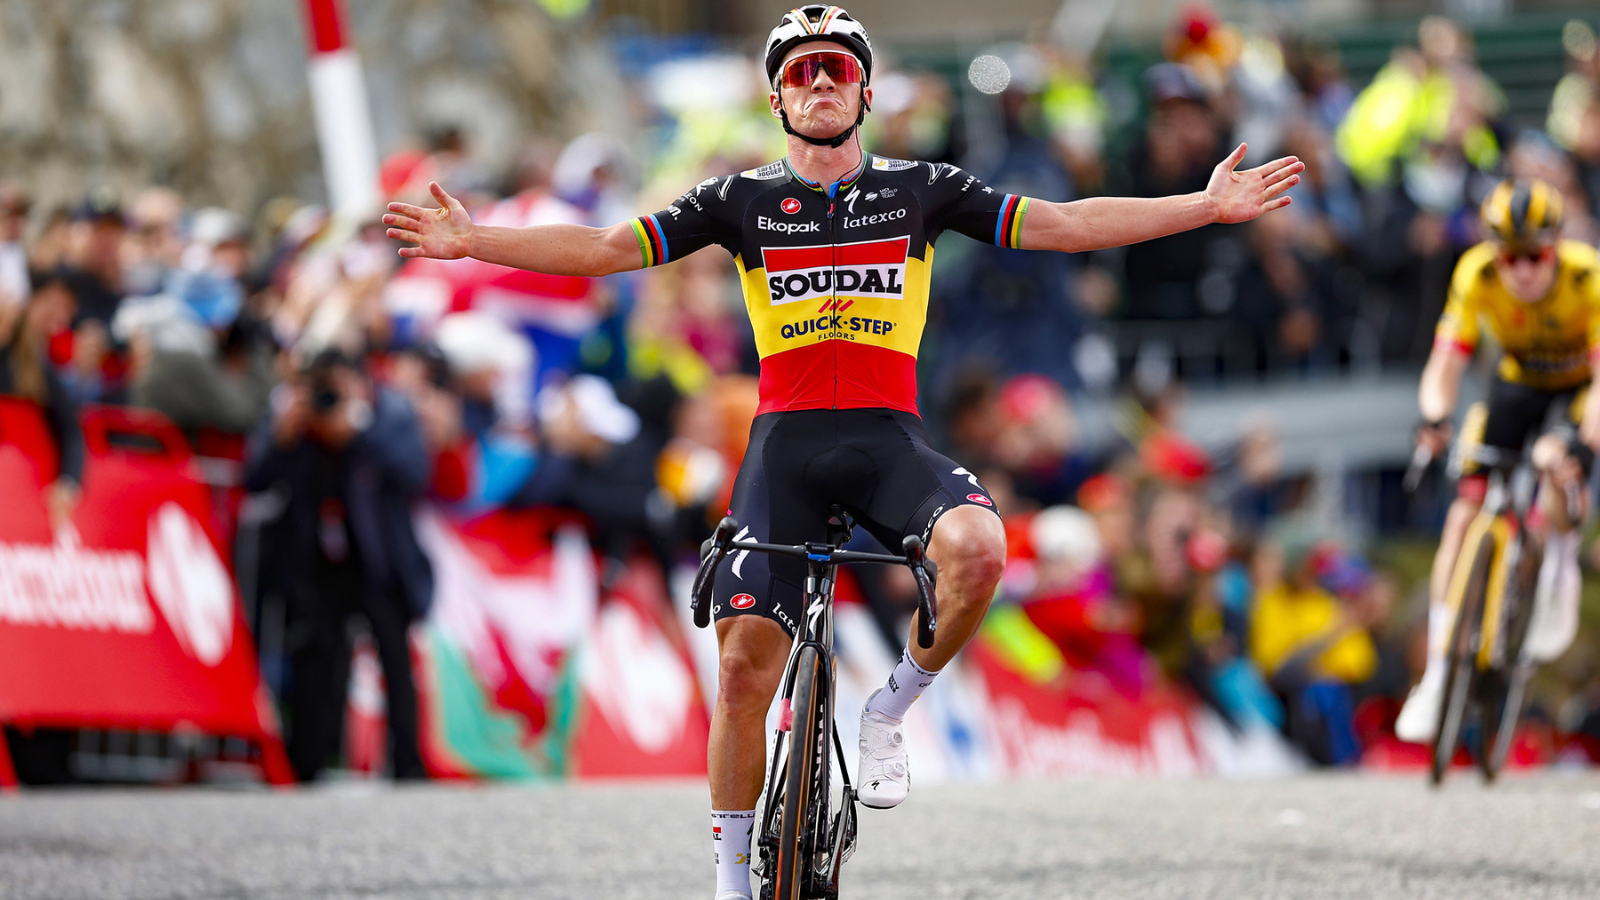 Begian cycling superstar Remco Evenepoel wins the 3rd stage of Vuelta a Espana 2023 on a summit finish in Andorra